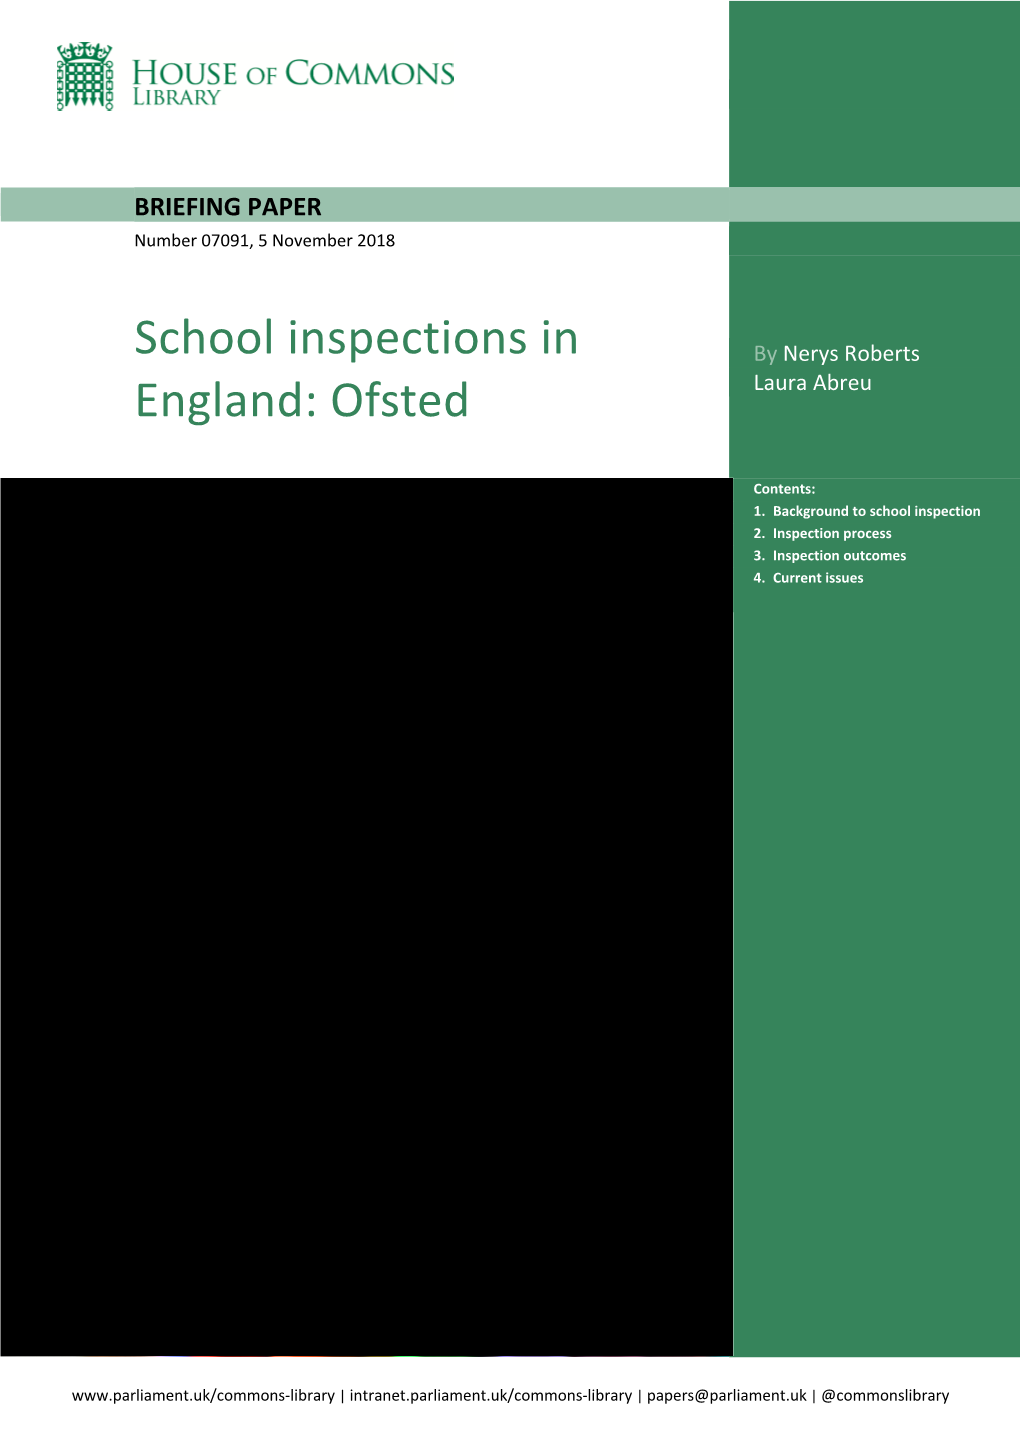 School Inspections in England: Ofsted